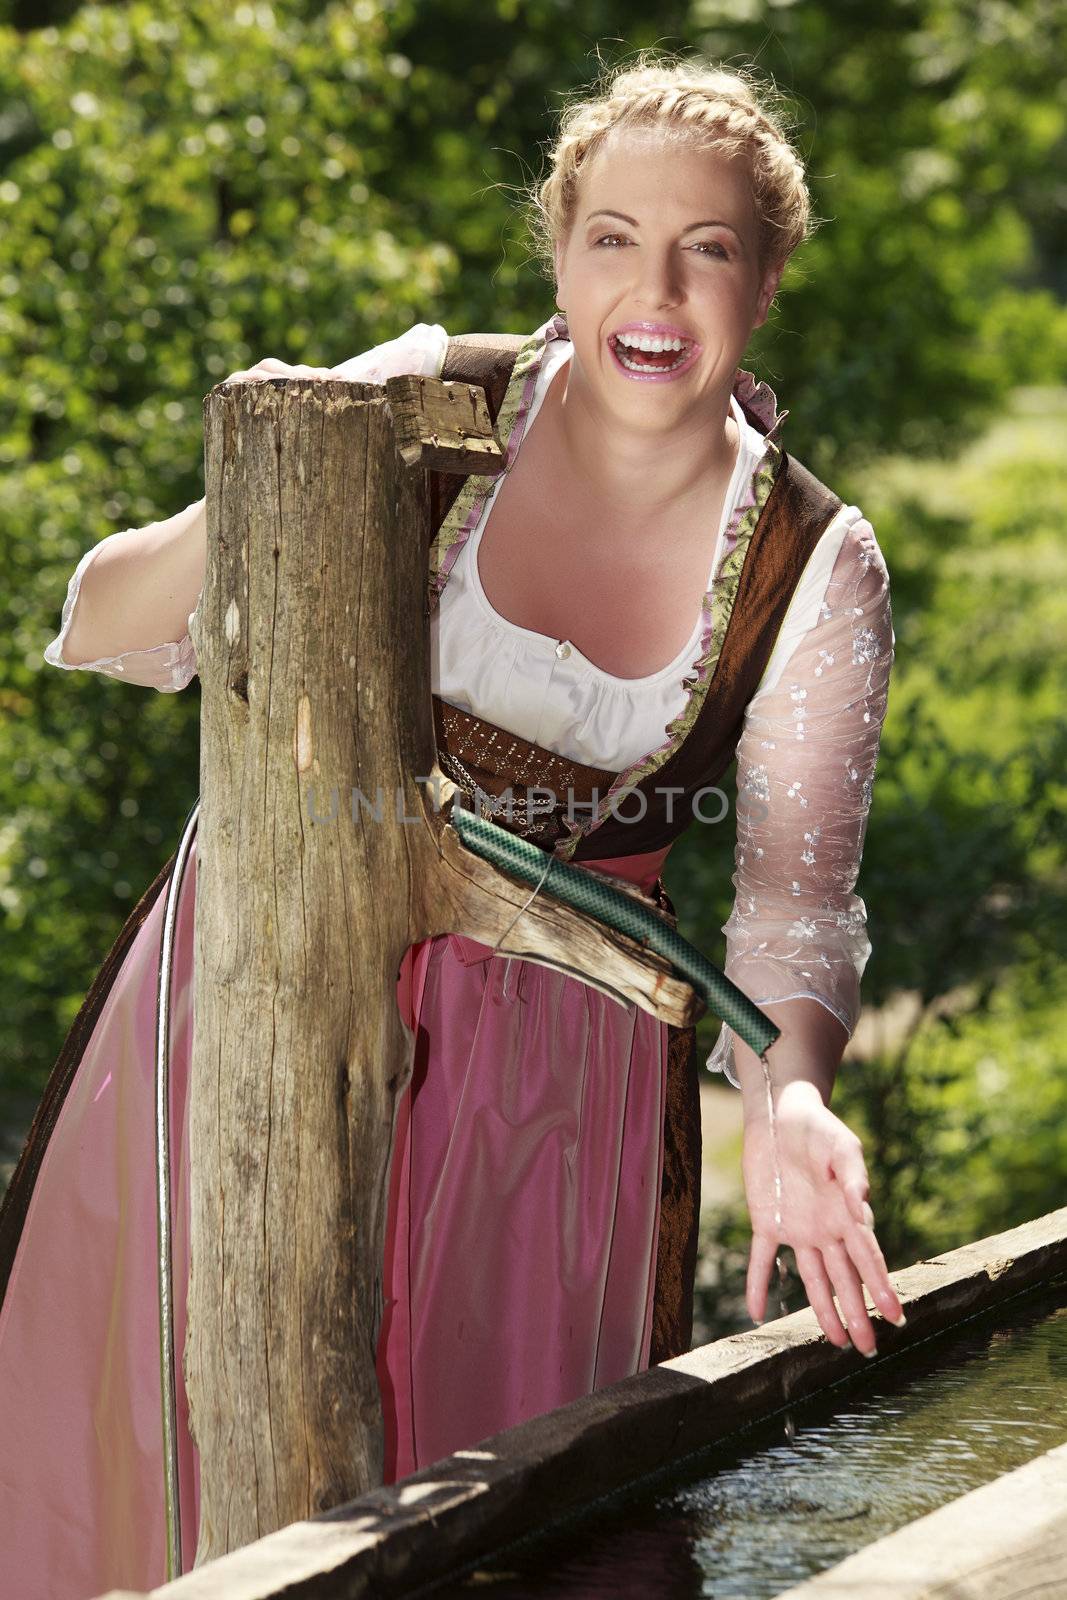 Laughing girls in Bavarian costume at a well